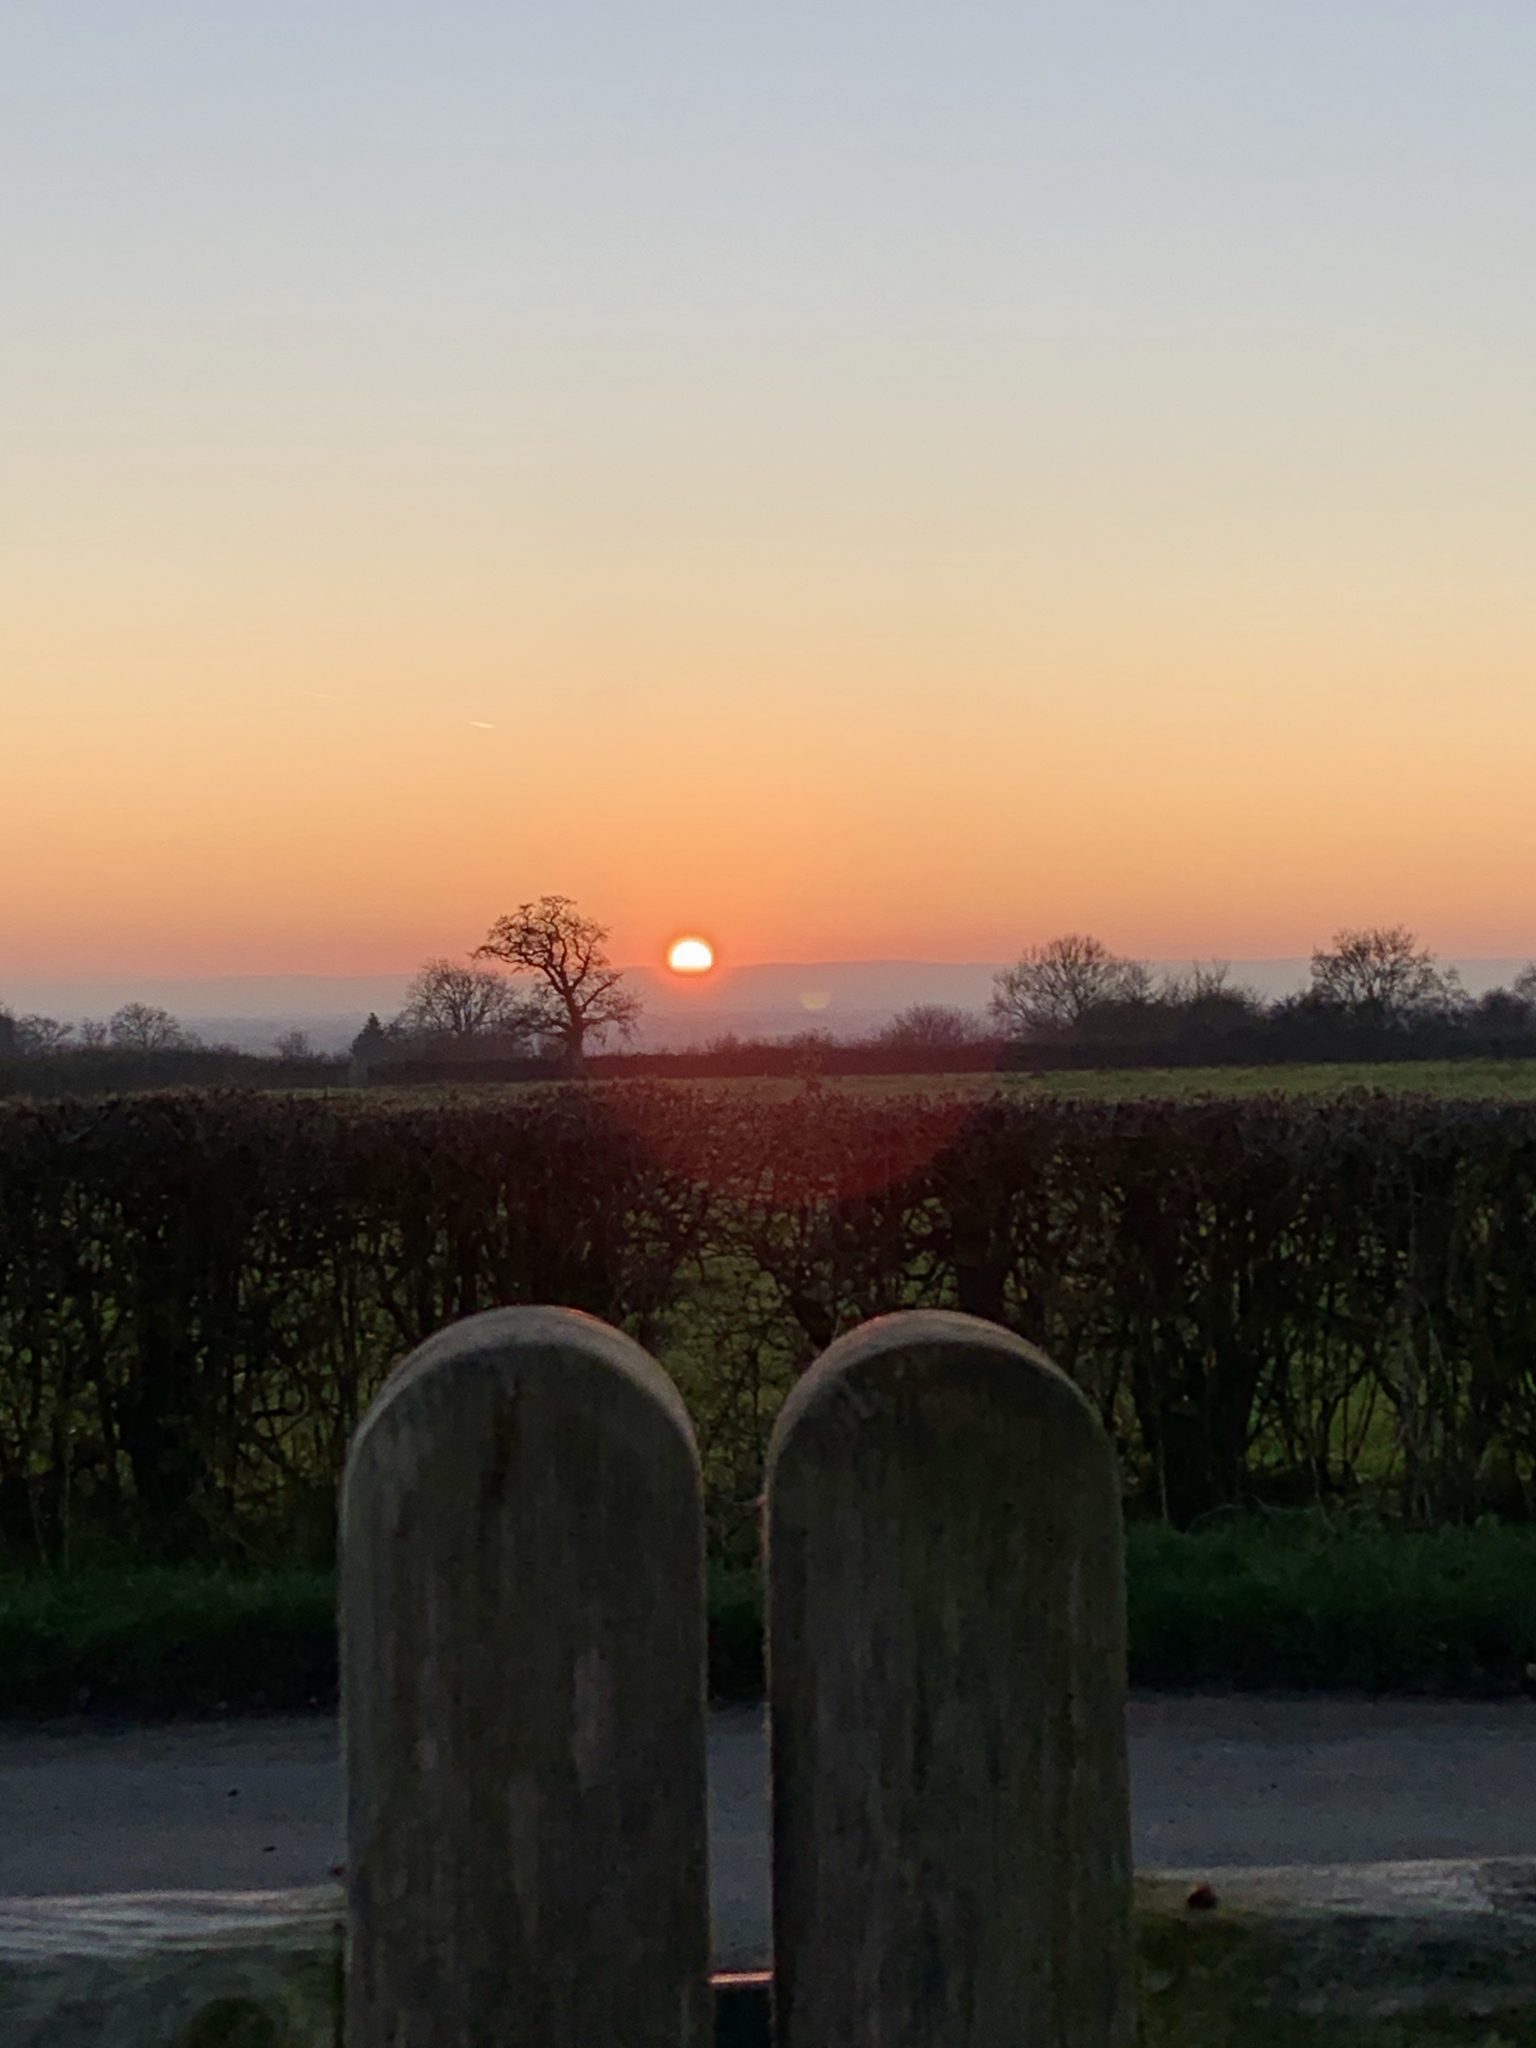 Sunset over the gate